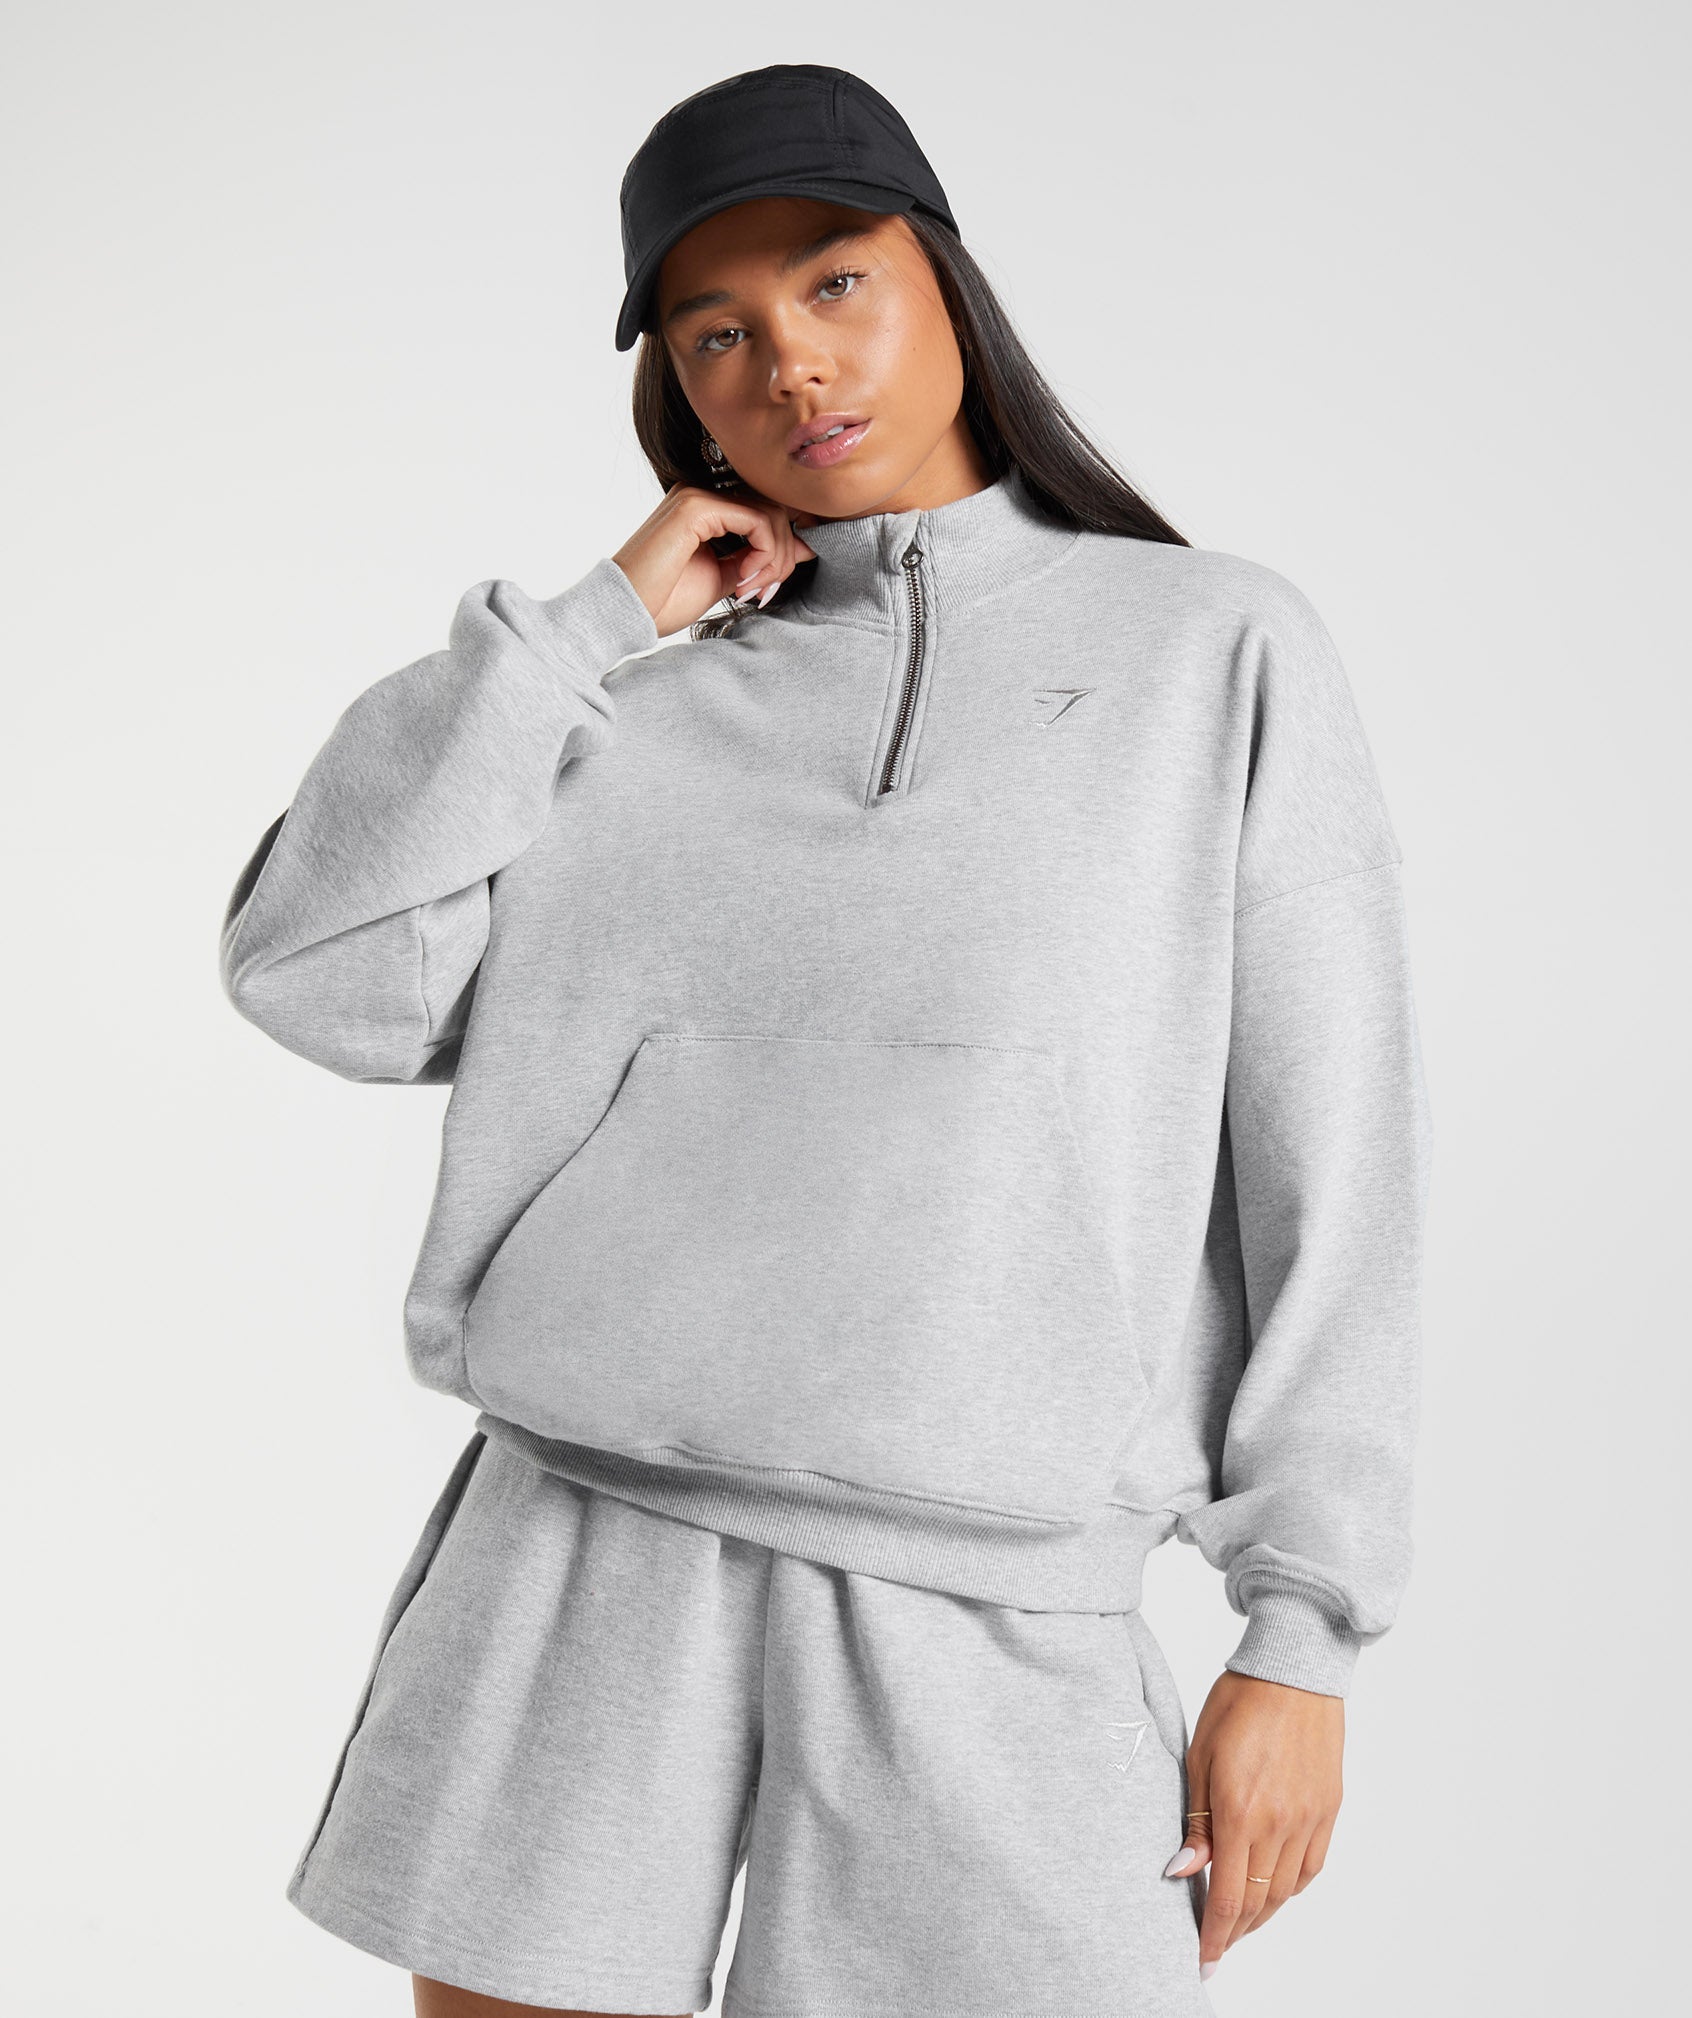 Rest Day Sweats 1/2 Zip Pullover in Light Grey Core Marl